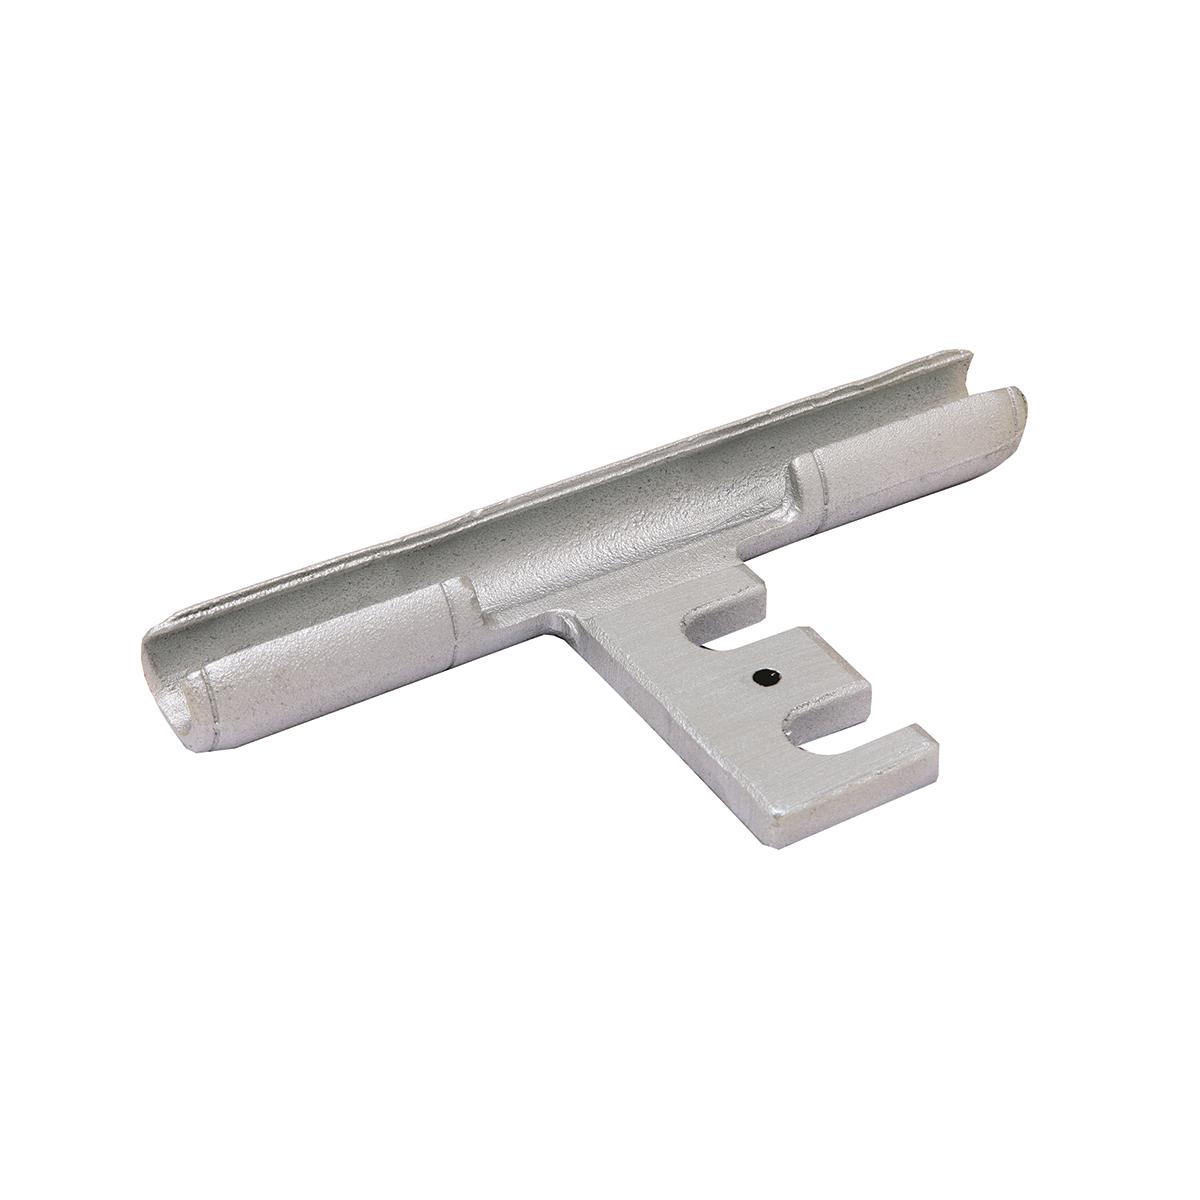 Hubbell YTA37R2N AL primary T-tap connector with slotted tap pad designed for easy disconnecting of tap conductor, For use with Types YKA-R-2N and YKA-A-2N, Barrell Length: 3.88 IN L.  ; Features: Aluminum Primary T-Tap Connector With Slotted Tap Pad Designed For Easy Dis